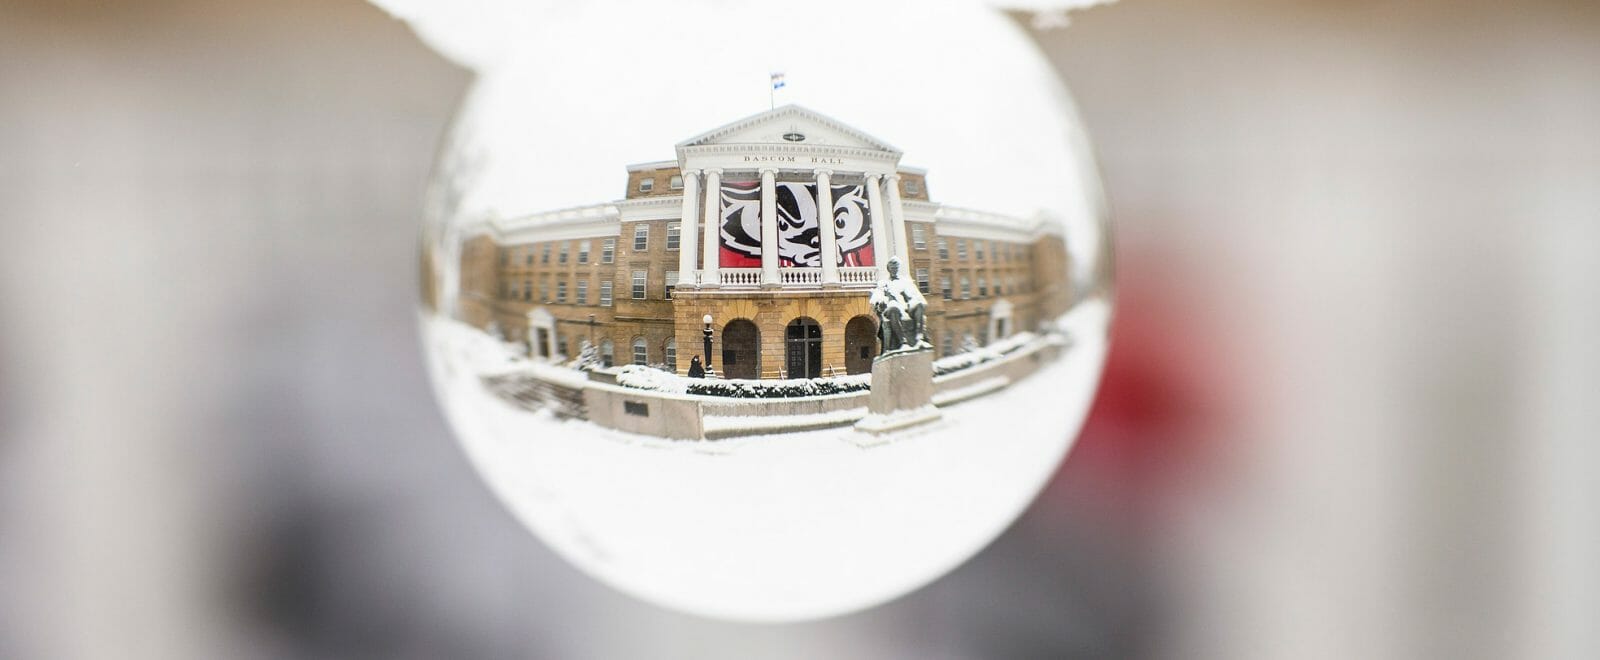 Bascom Hall as seen through a glass sphere in the snow